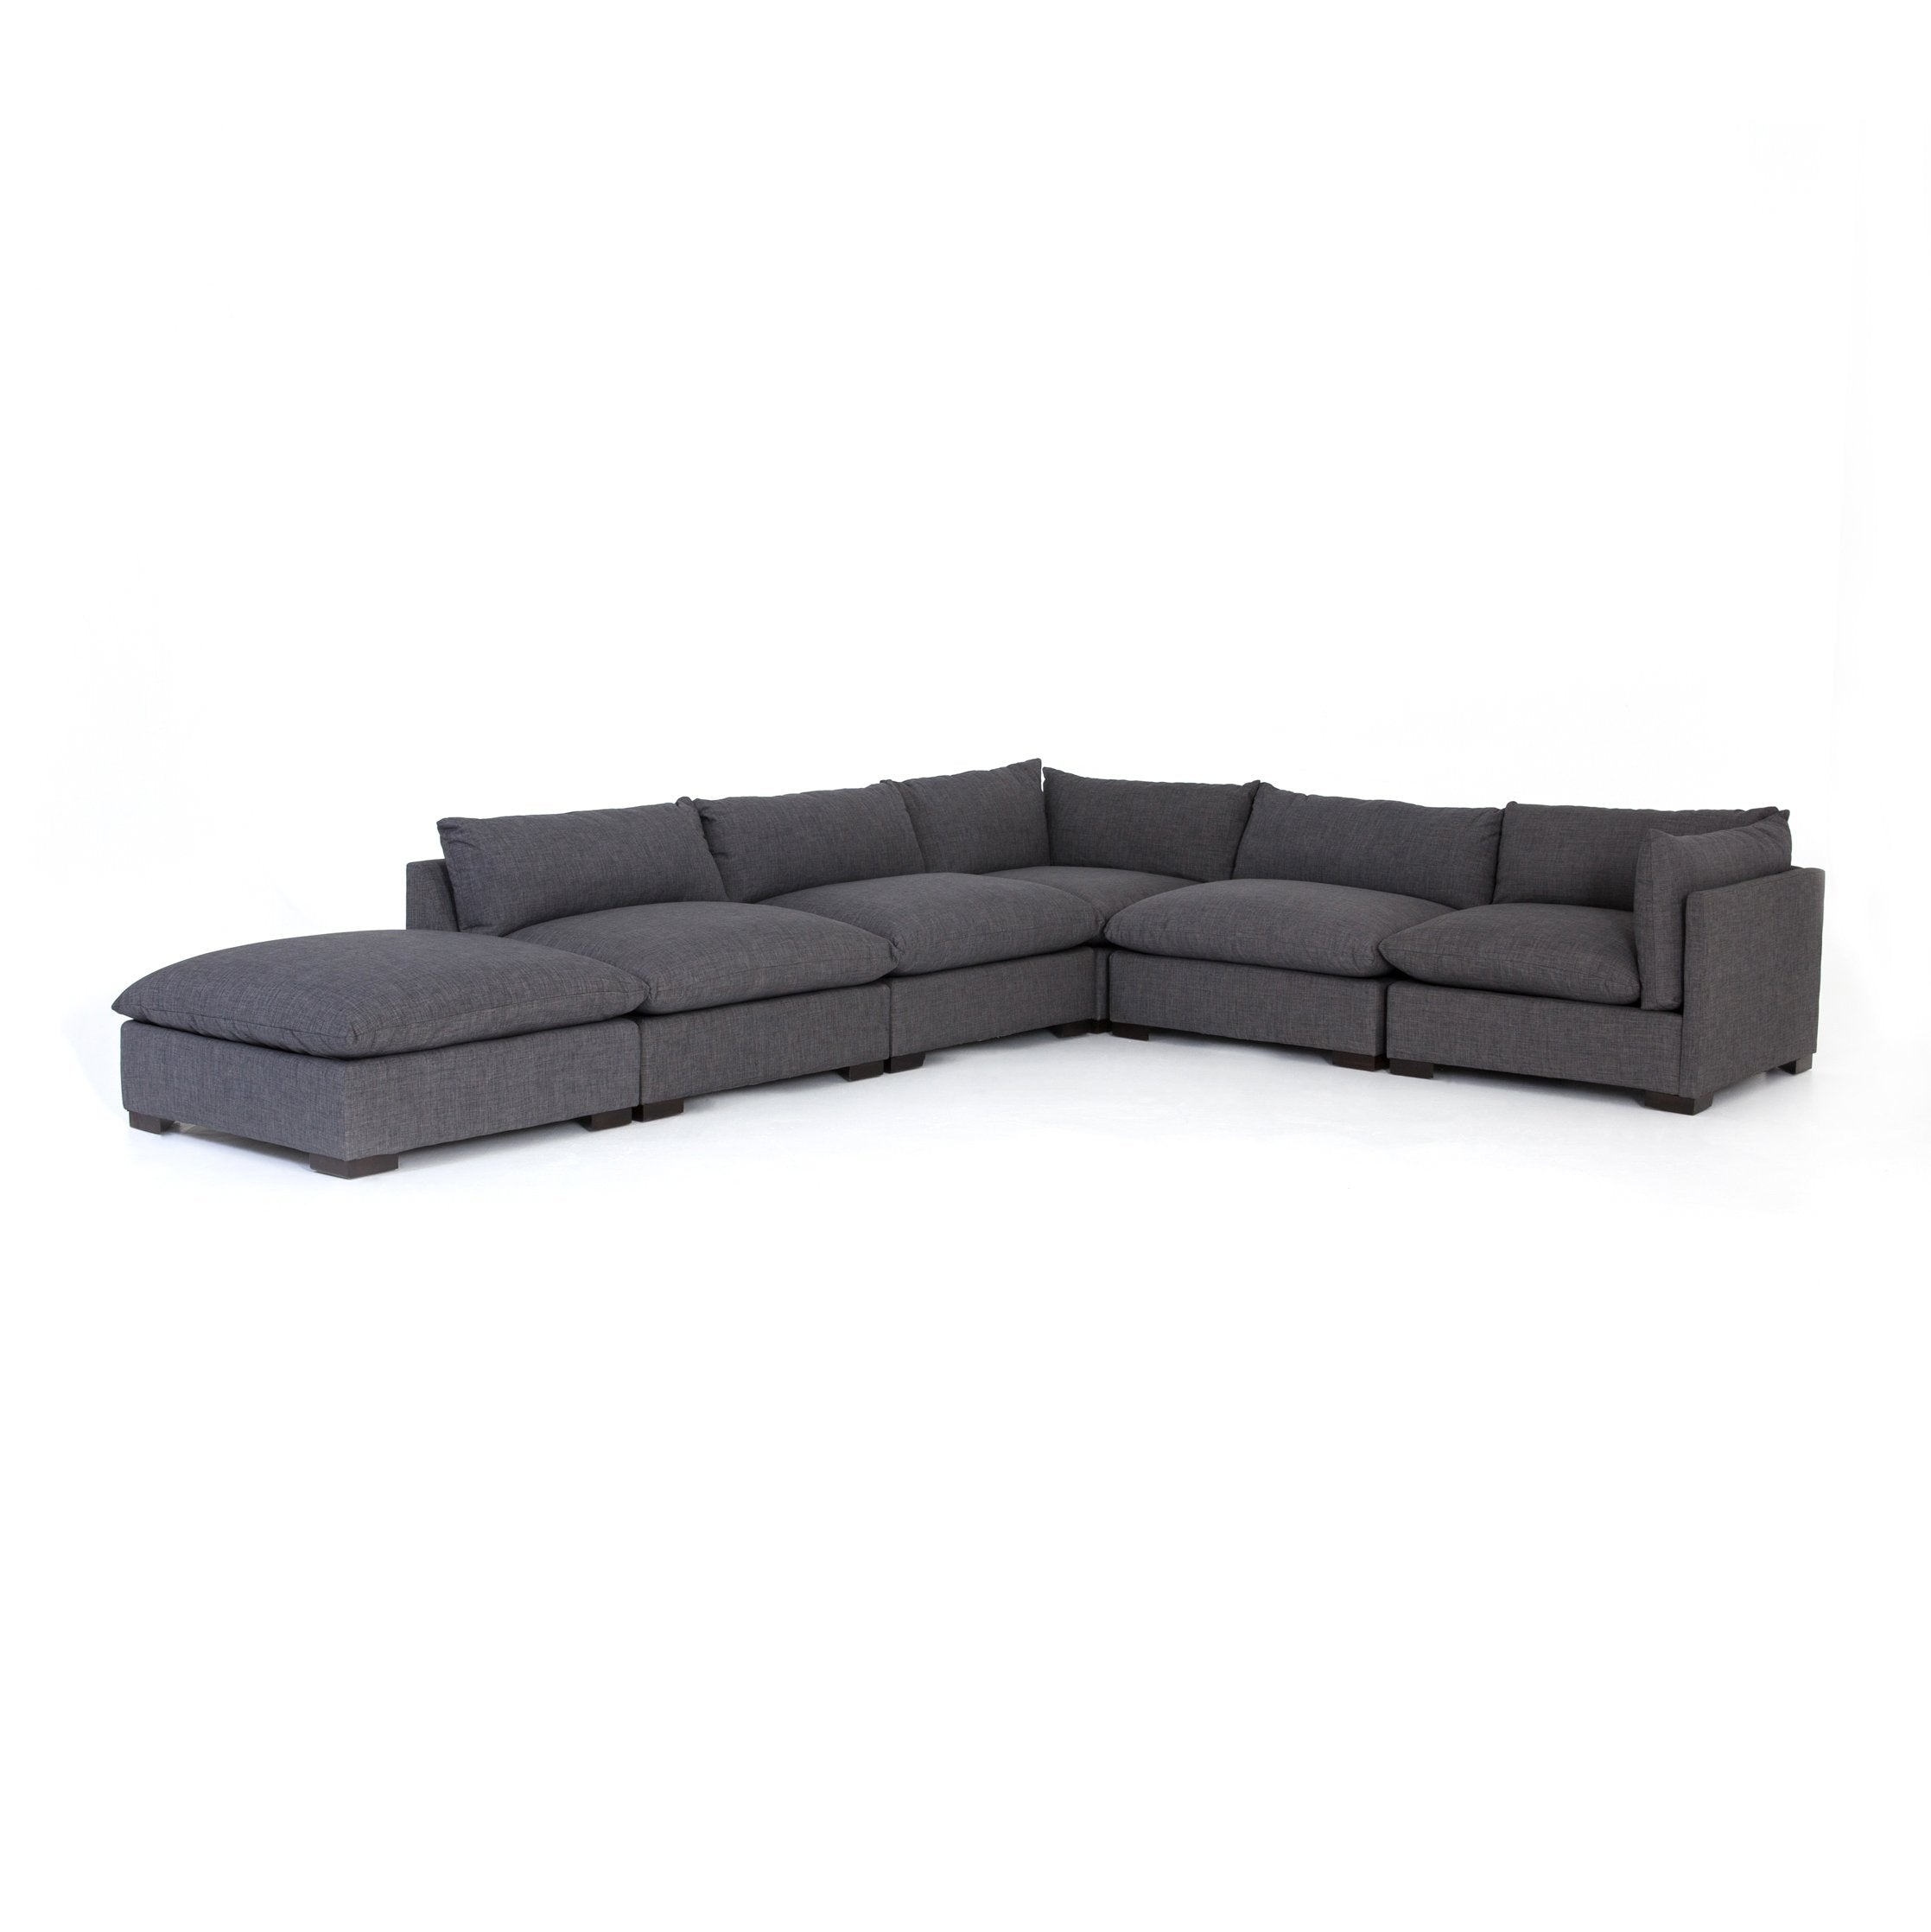 Westwood 5 Pc Sectional W Ottoman in Bennett Charcoal